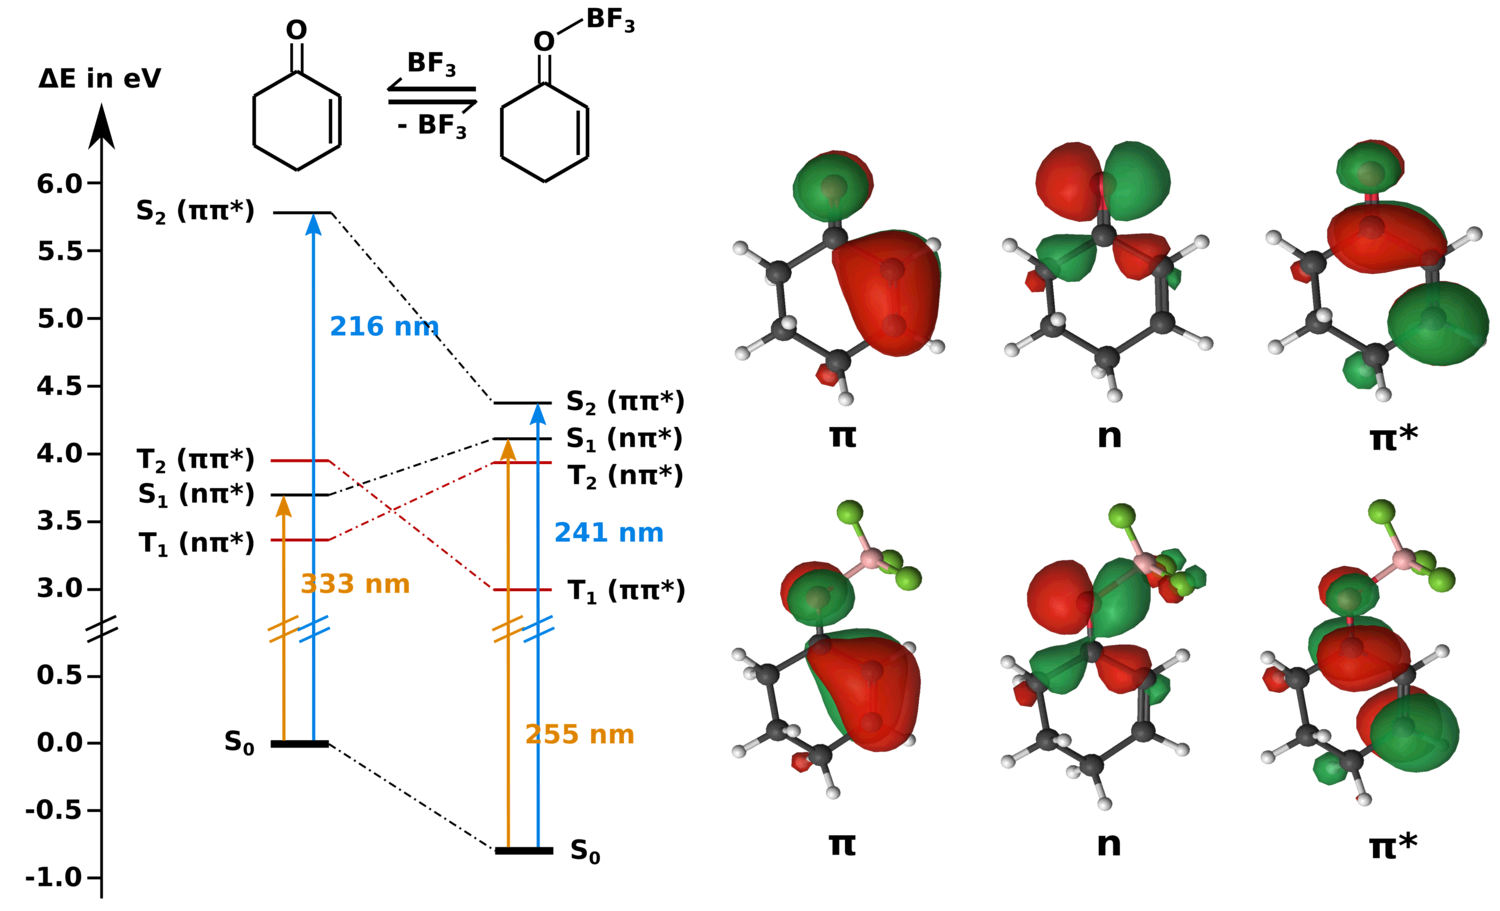 Level Scheme and Active Space for a Photochemical Bond Cleavage